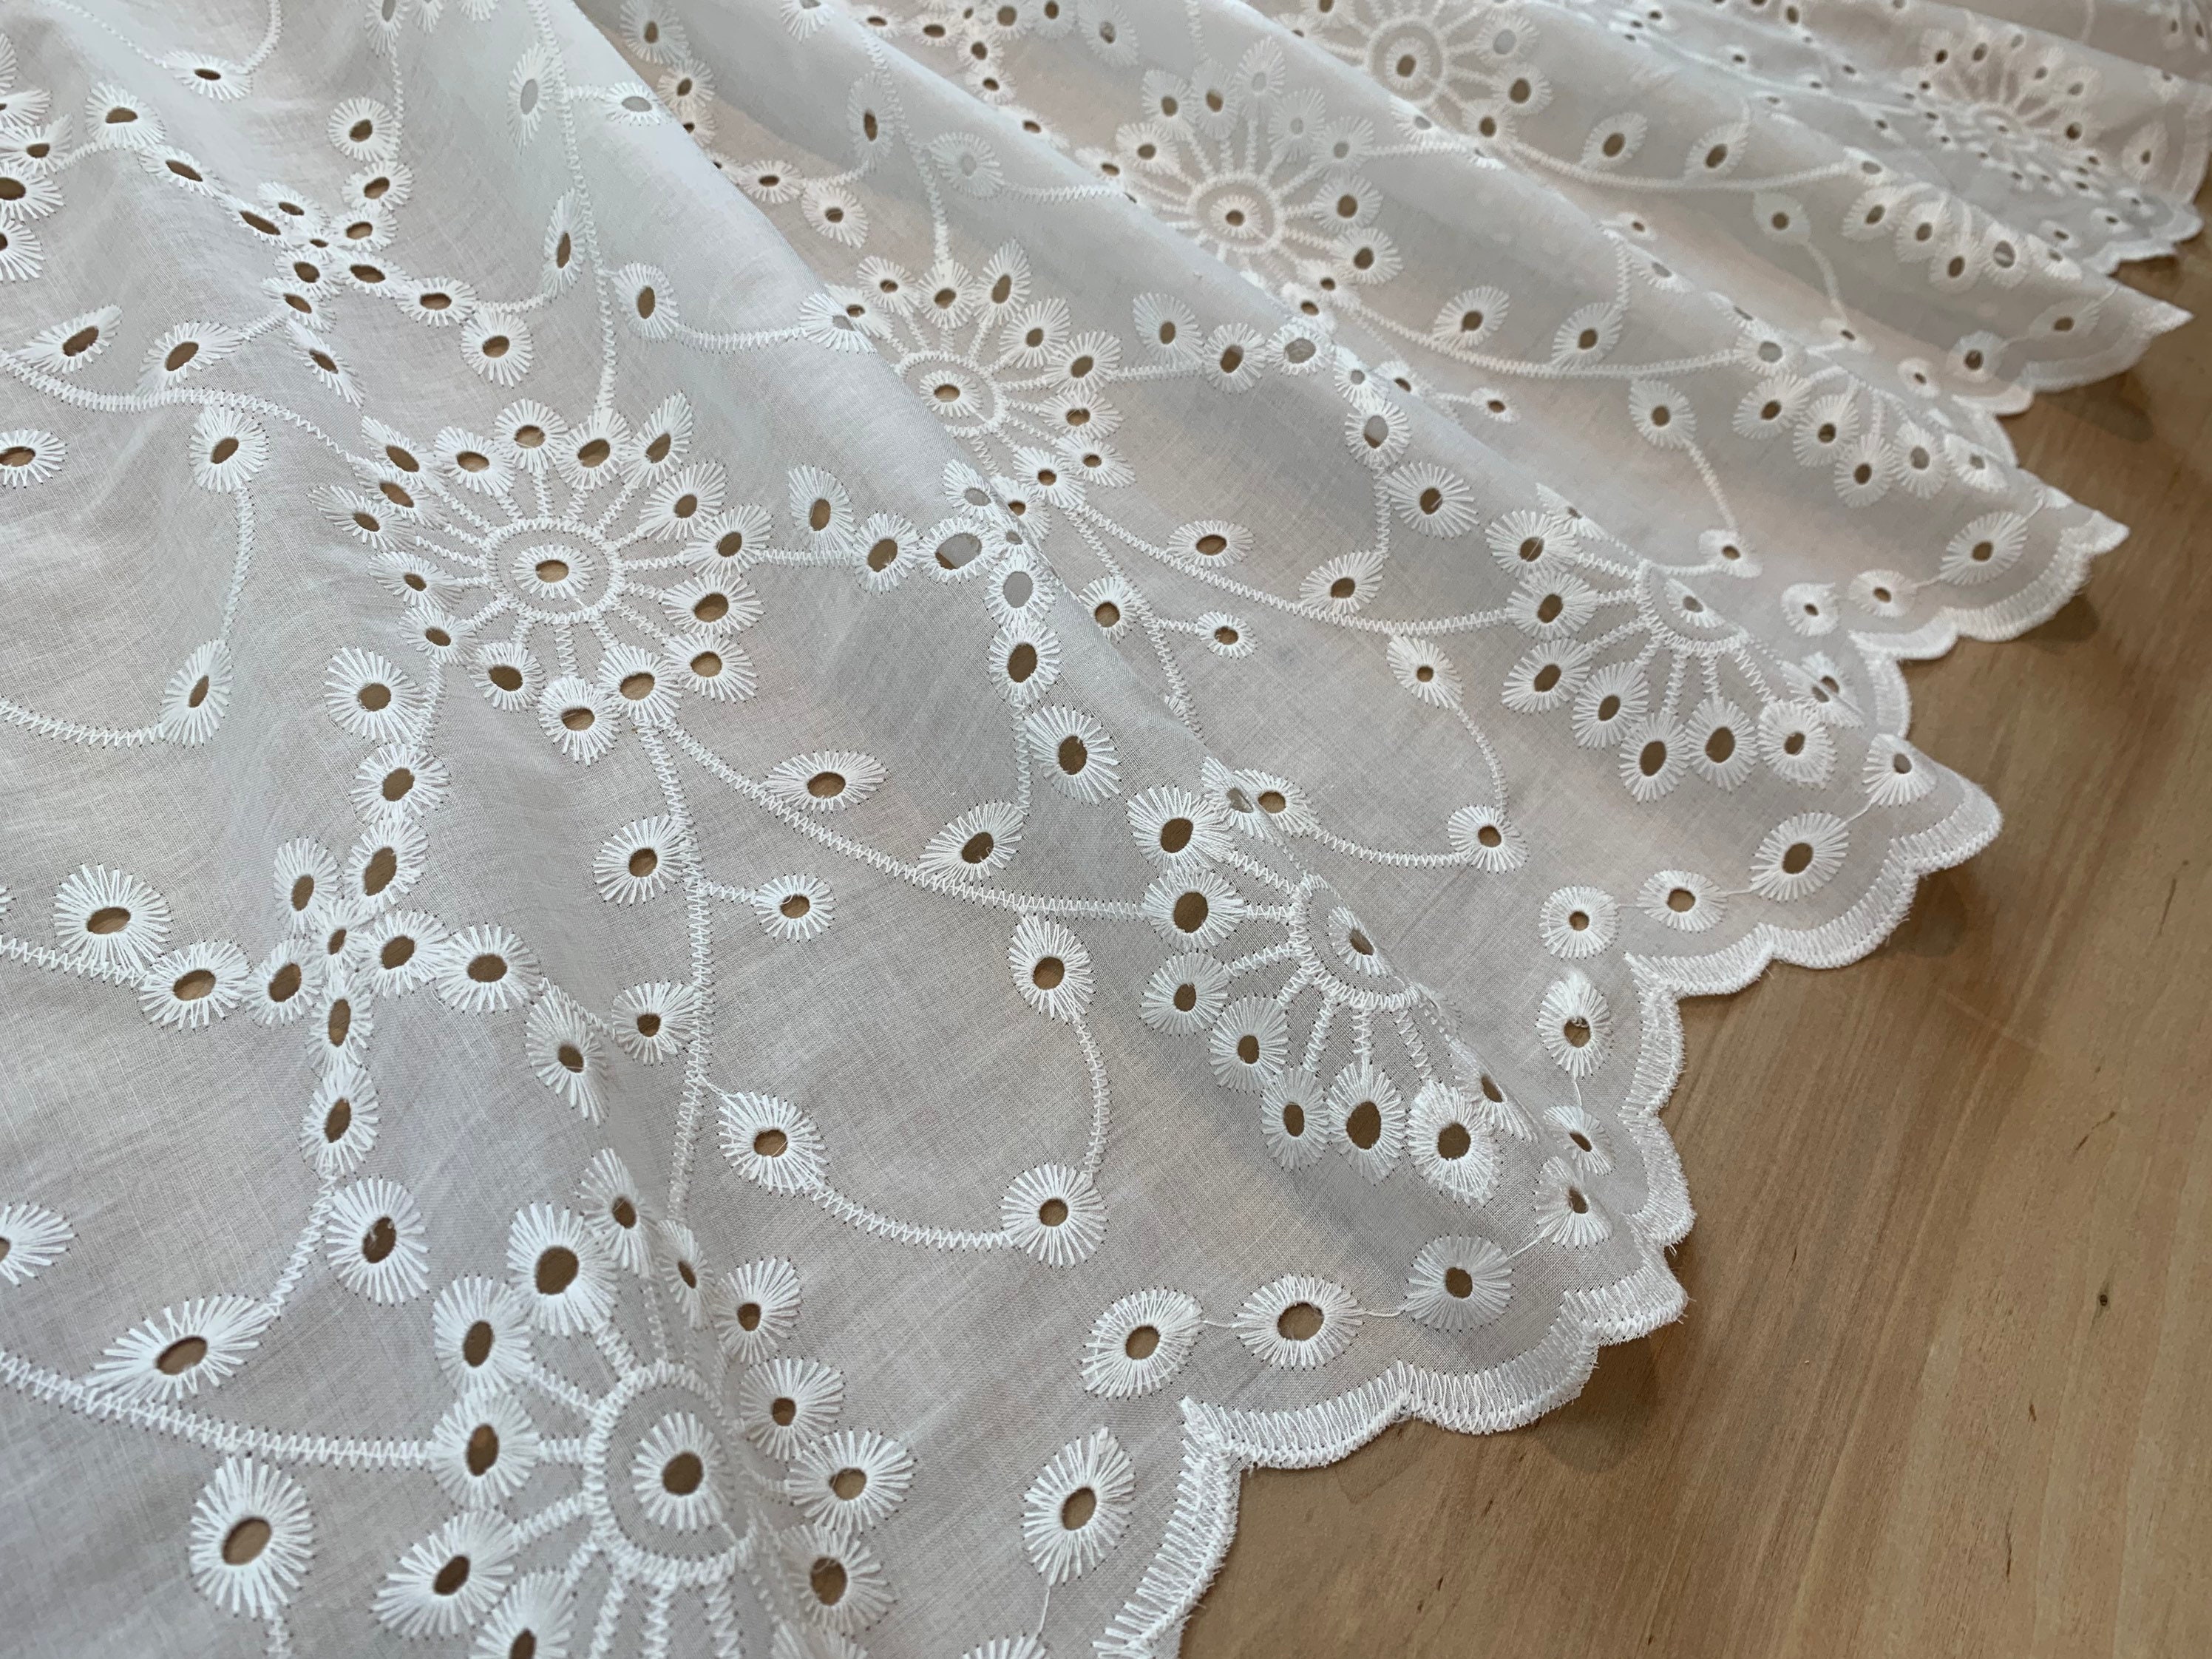 VU100 Scalloped Eyelet Lace Trim White, 4 inch Wide 2 Yard Cotton Lace Trim Fabric by The Yard, for Sewing Crafts Dress Tablcloth Blankets